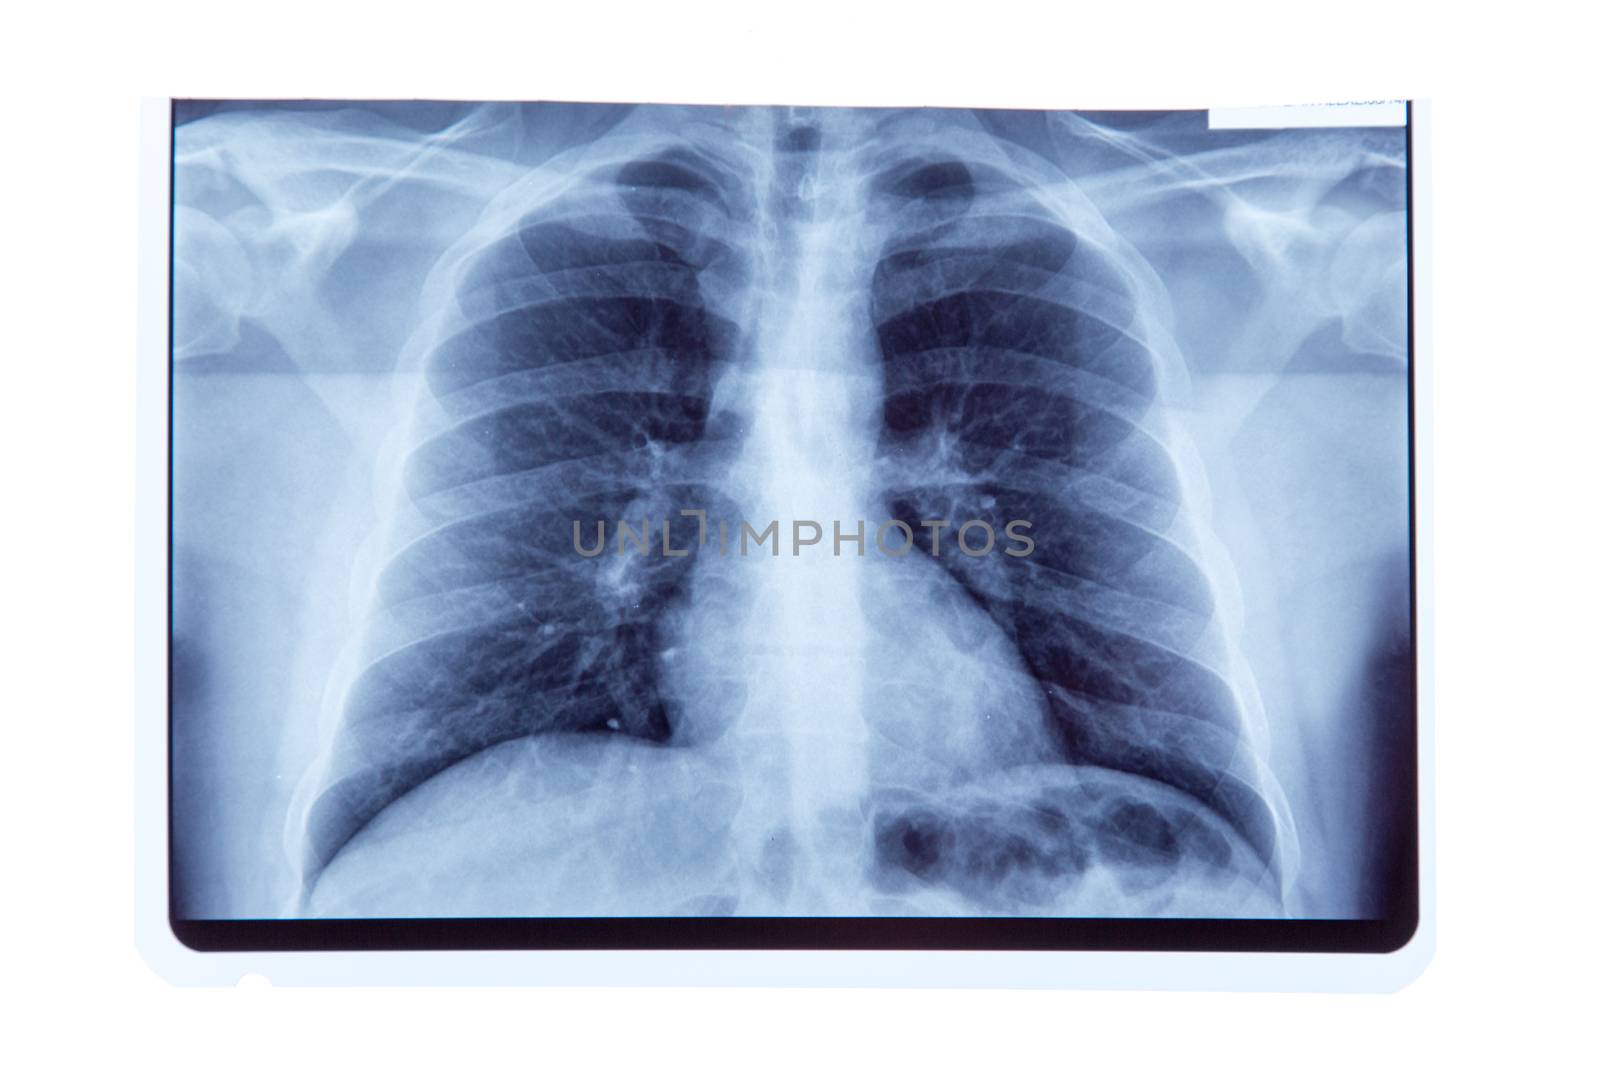 Lung radiography x-ray result  by Elisanth